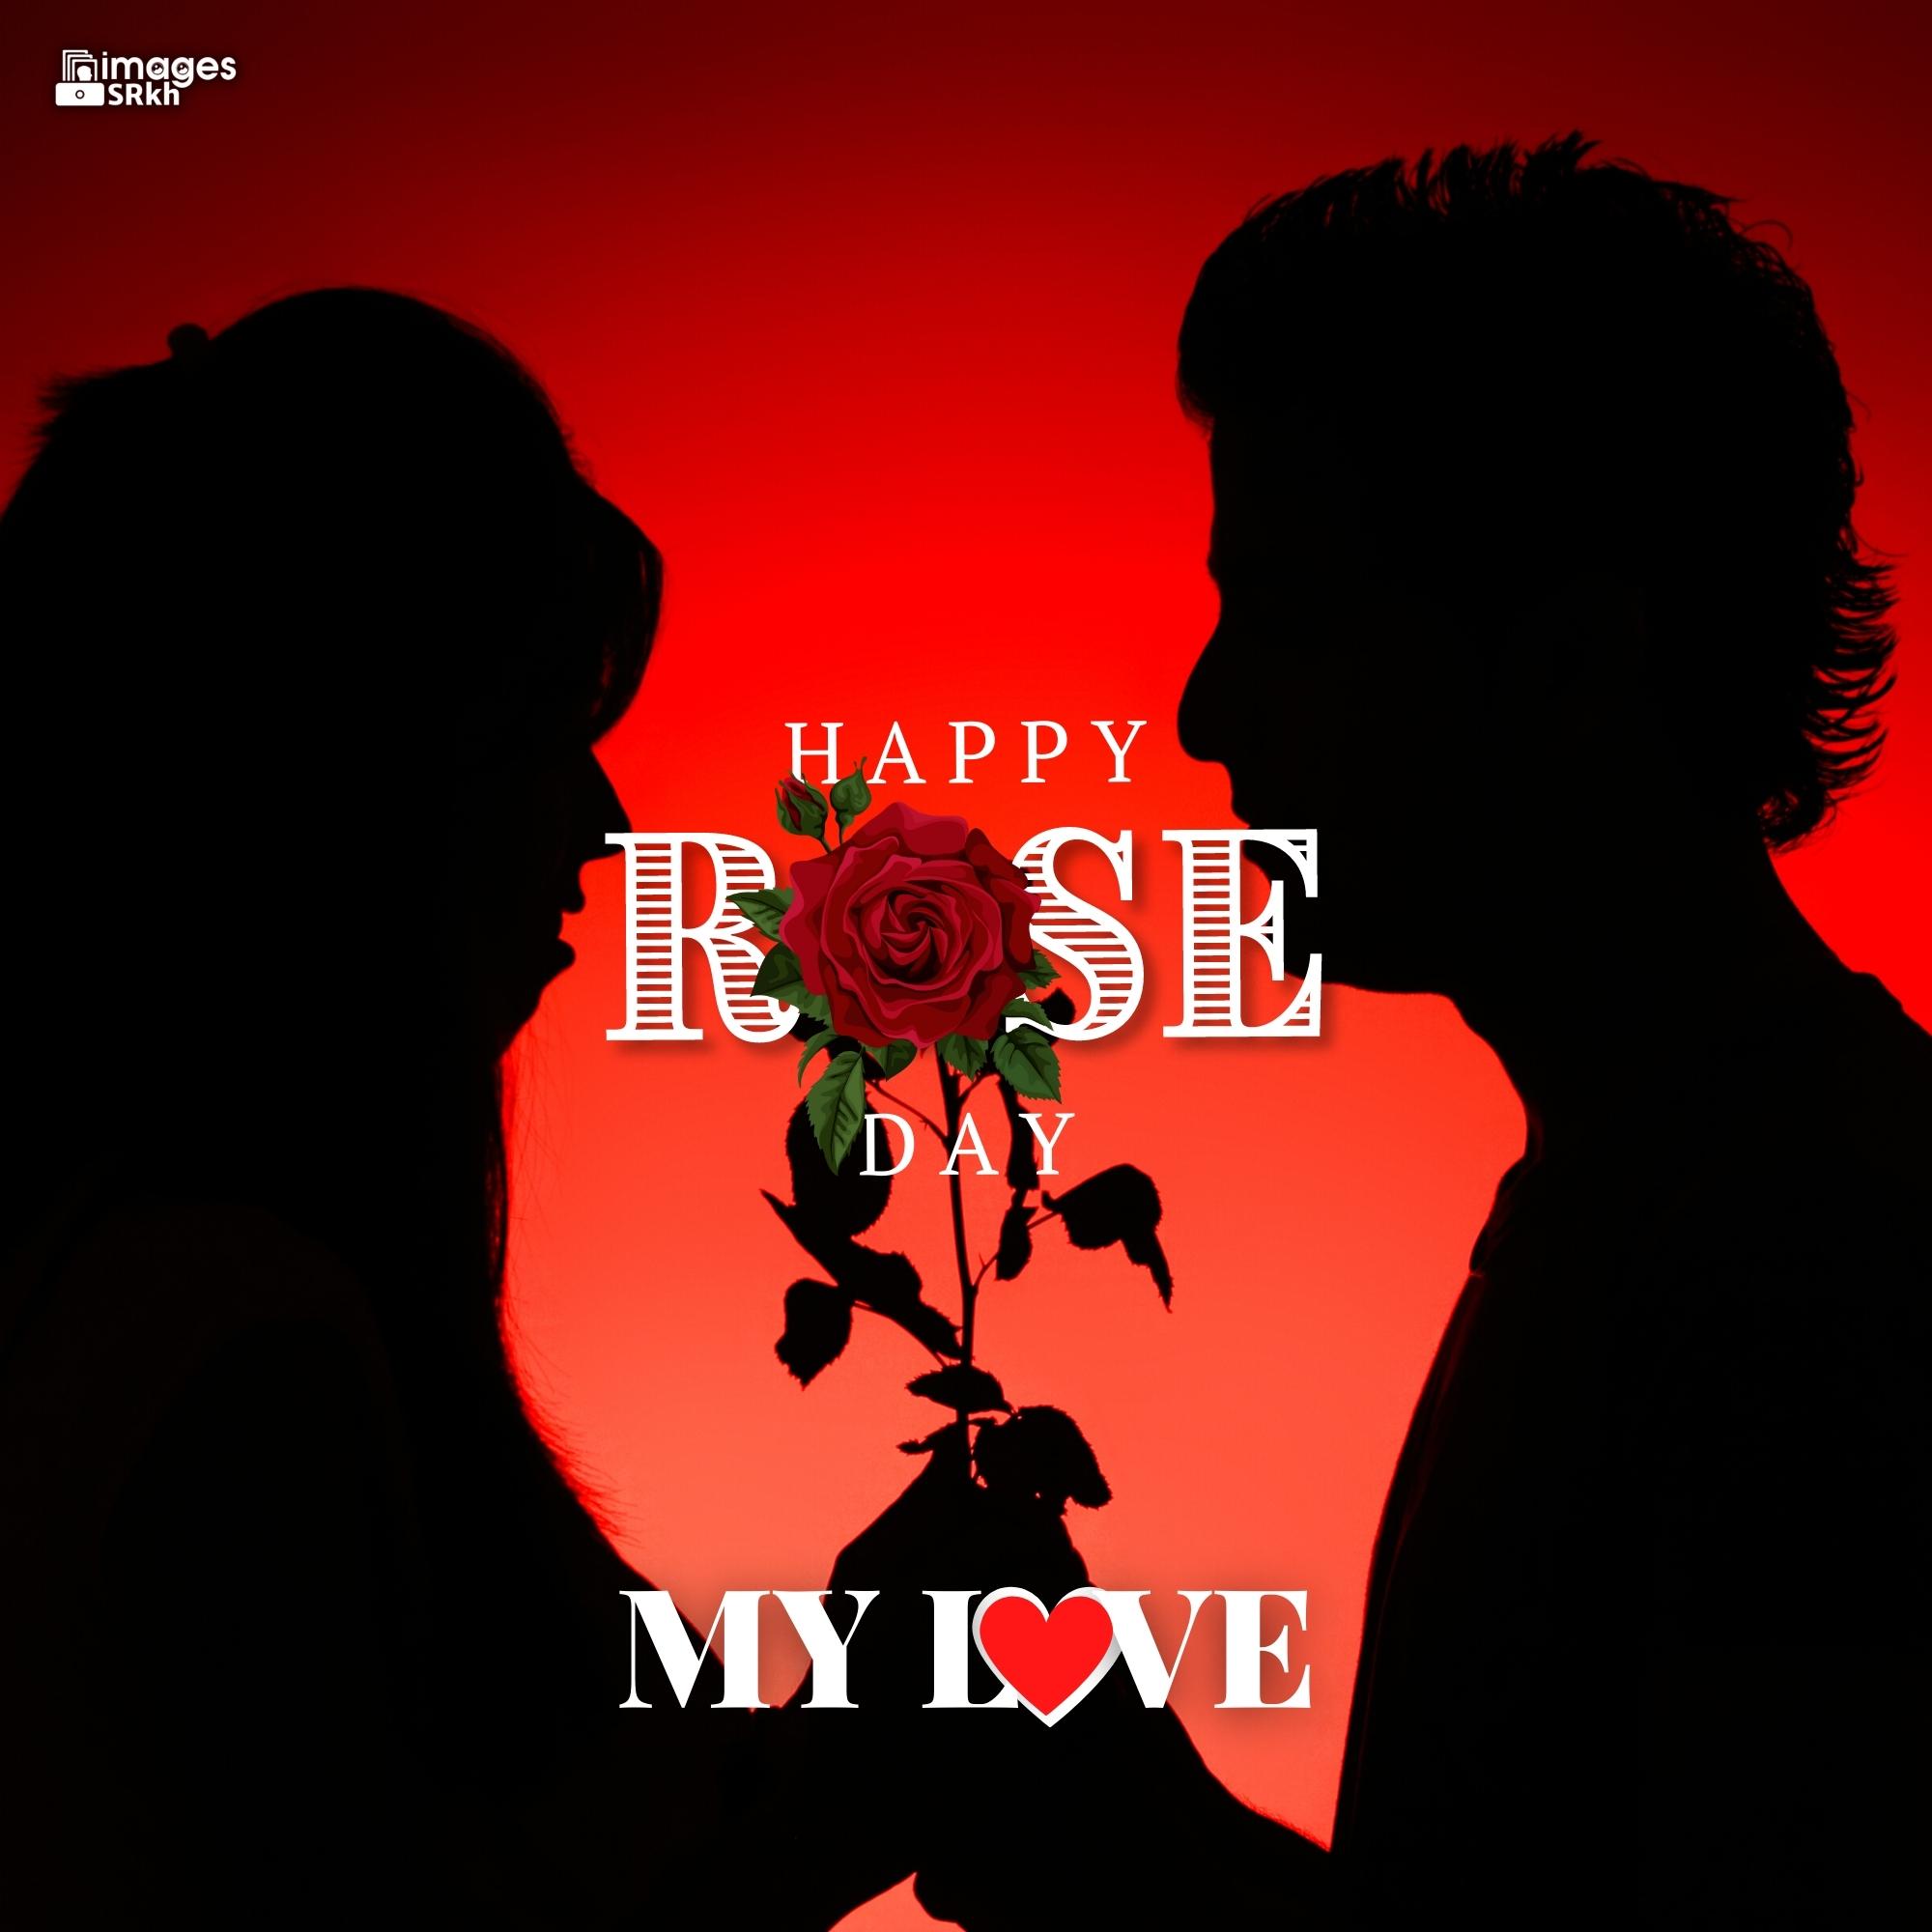 Happy Rose Day My Love (40) | HD IMAGES